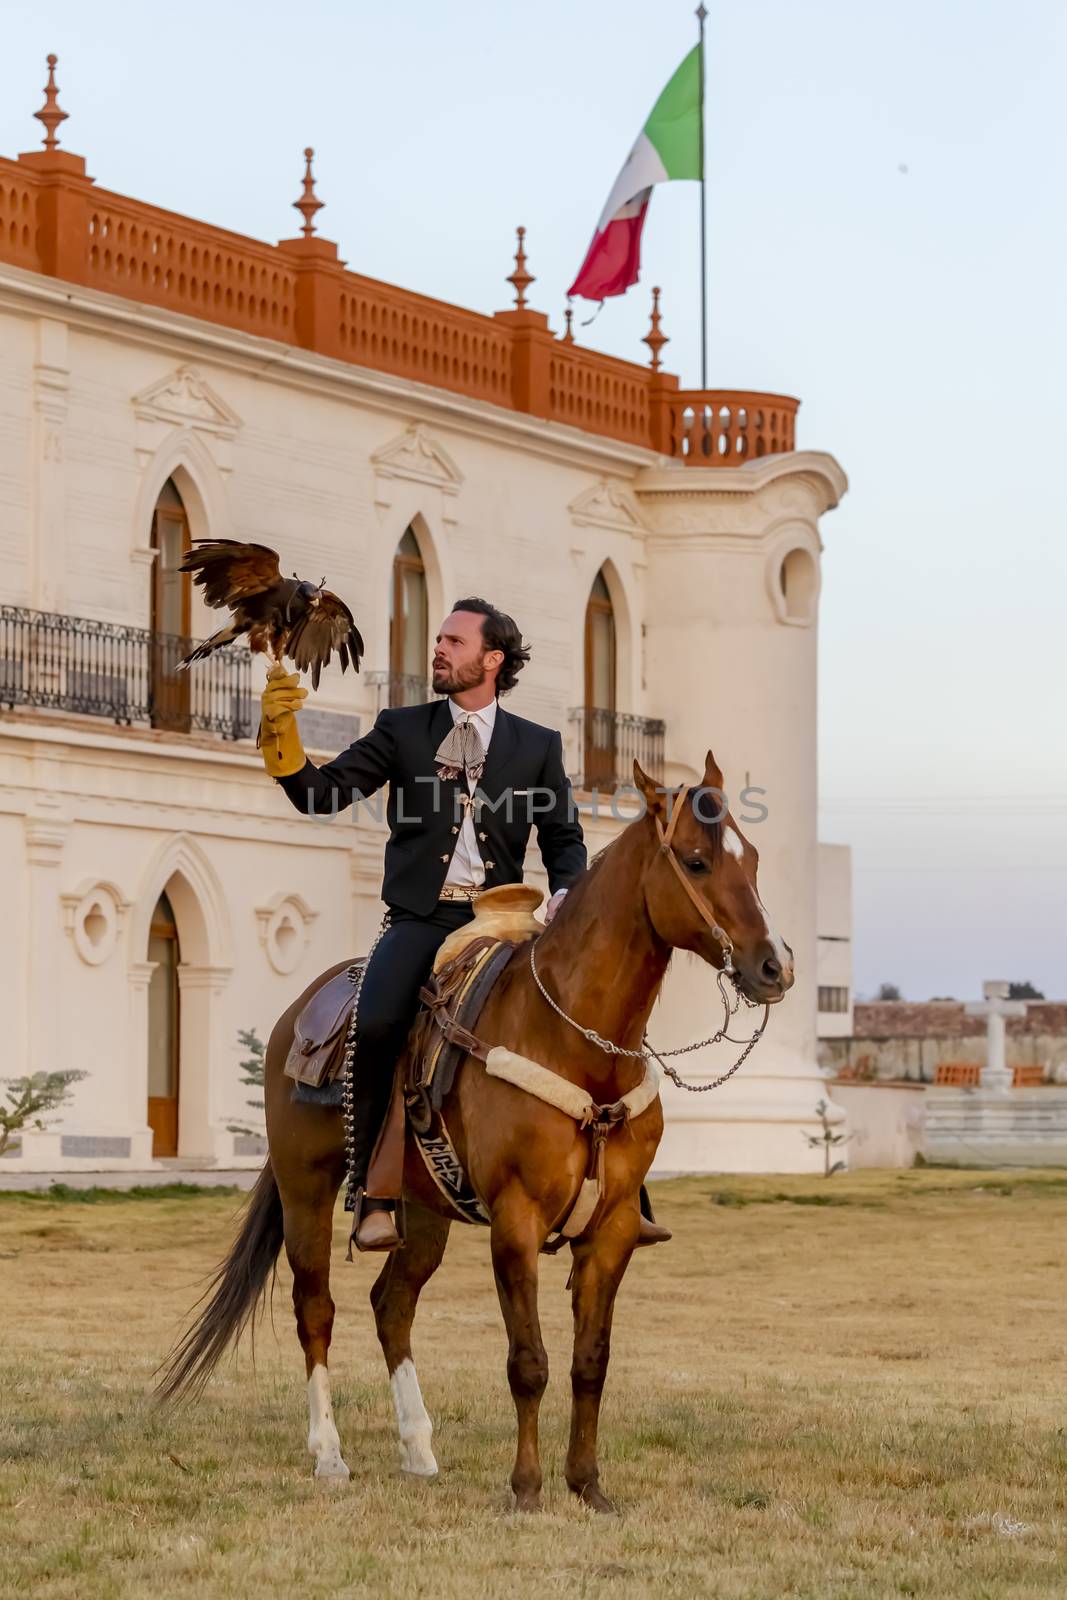 A Very Handsome Mexican Charro Poses In Front Of A Hacienda In The Mexican Countryside While Holding His Pet Falcon by actionsports